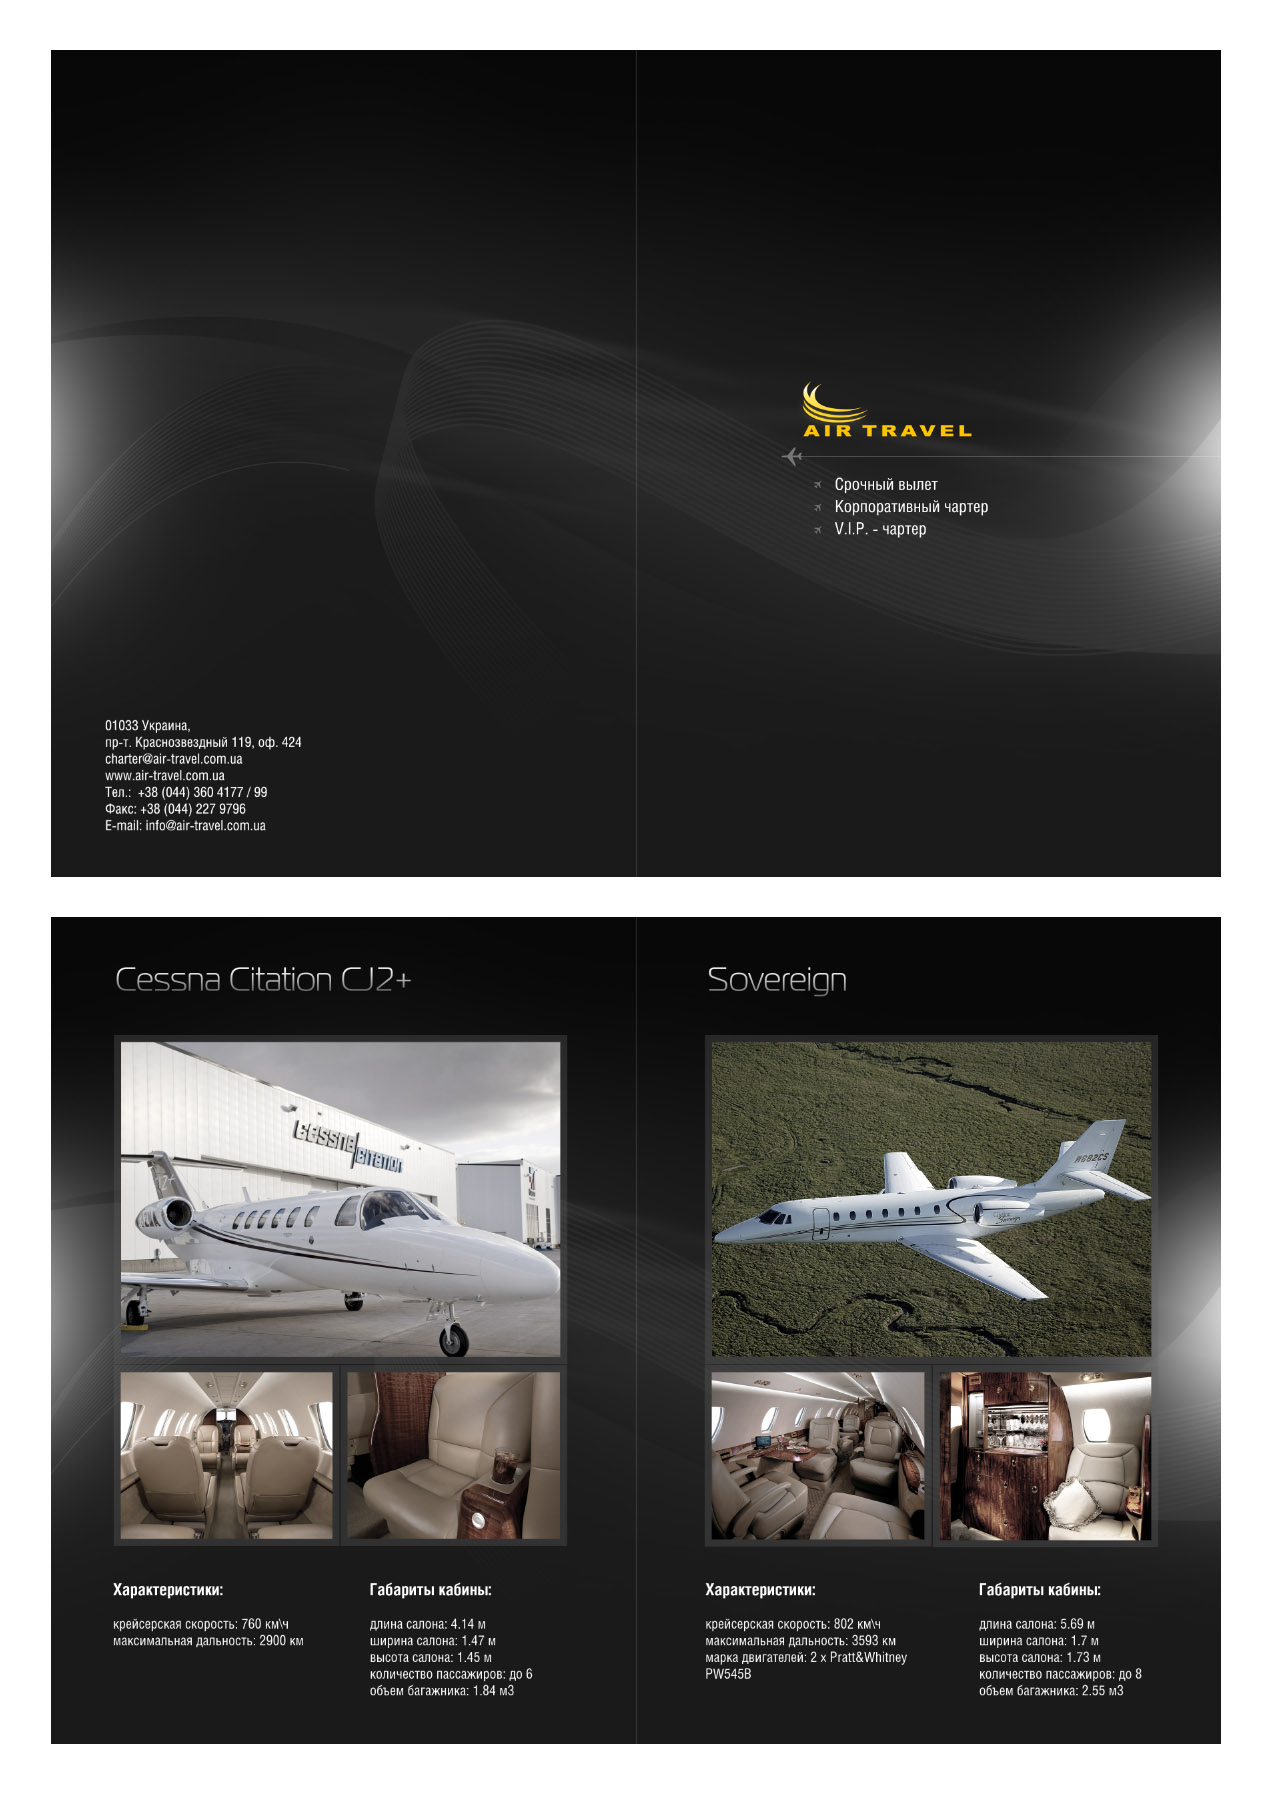 Graphic design of booklet for Airtravel company